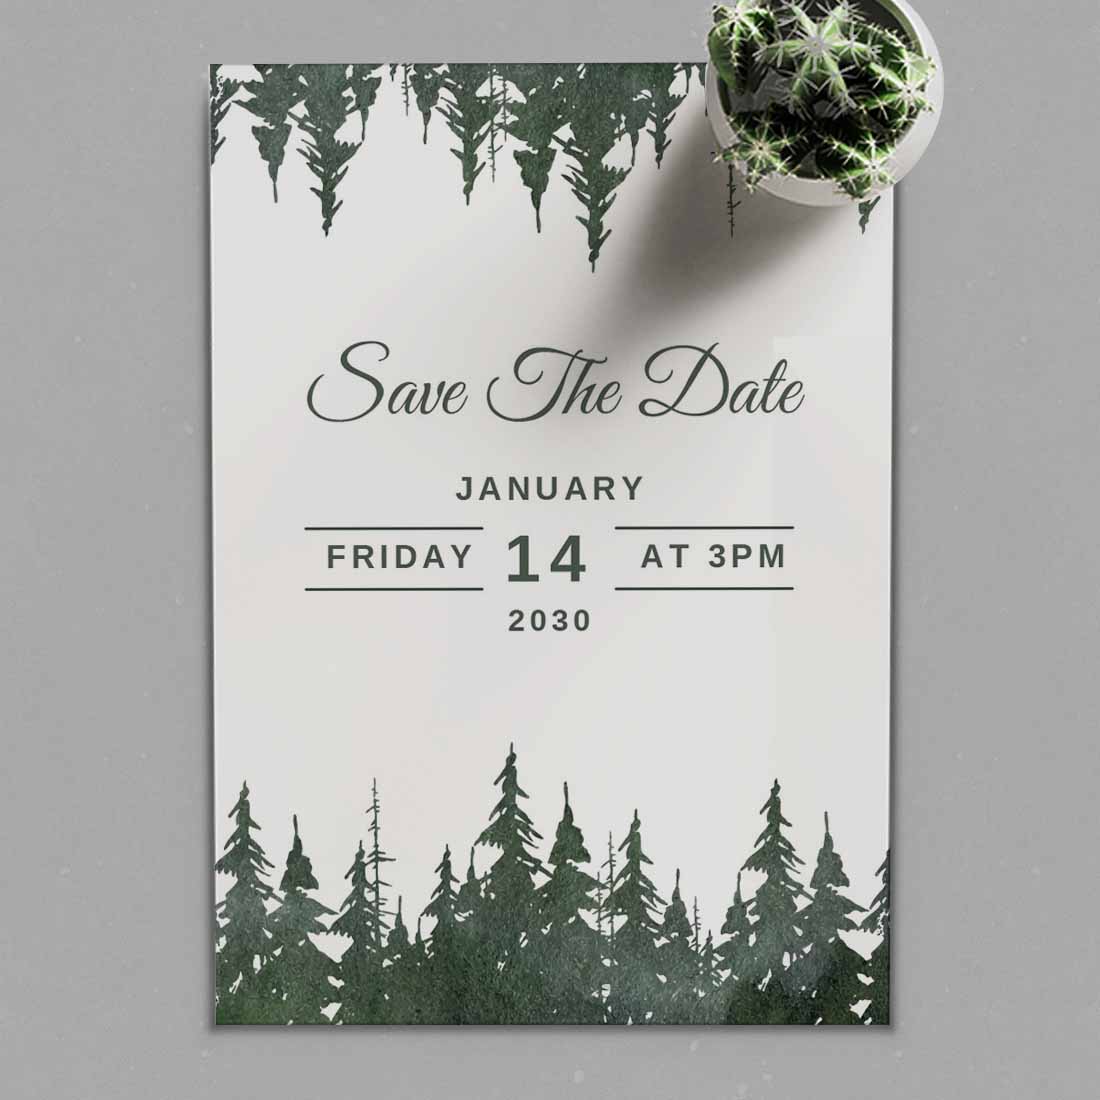 Image of a wonderful wedding card with winter design